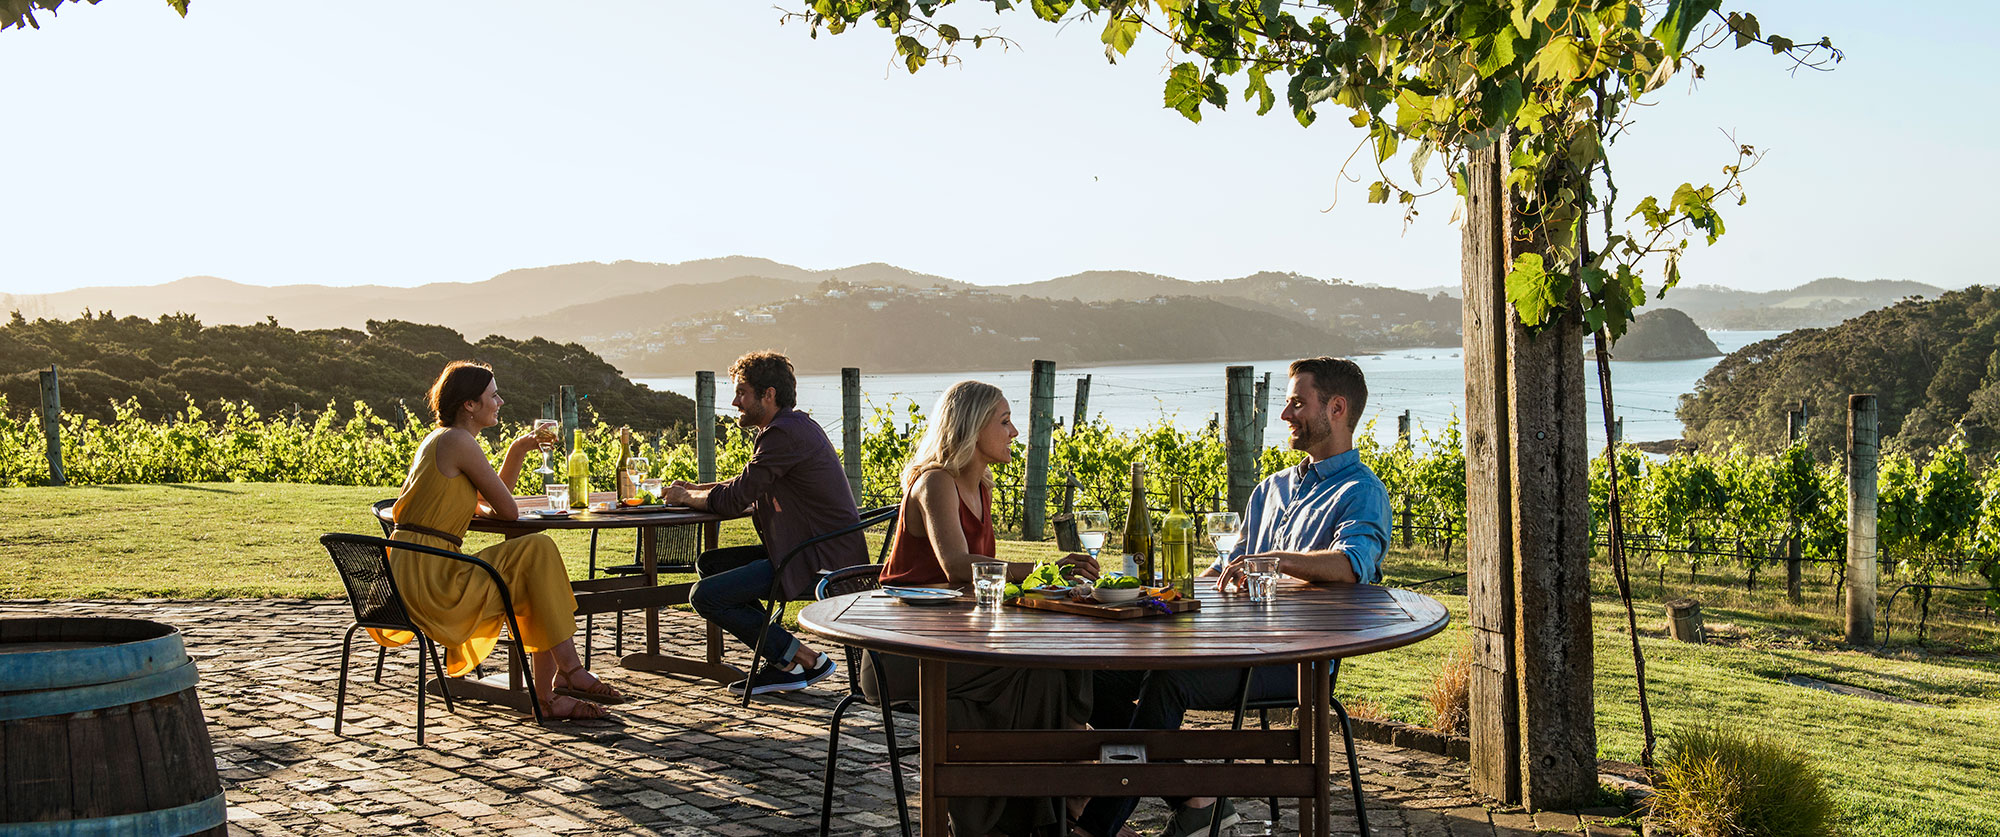 New Zealand Romantic Luxury Vacation - Wine and Dine in Bay of Islands